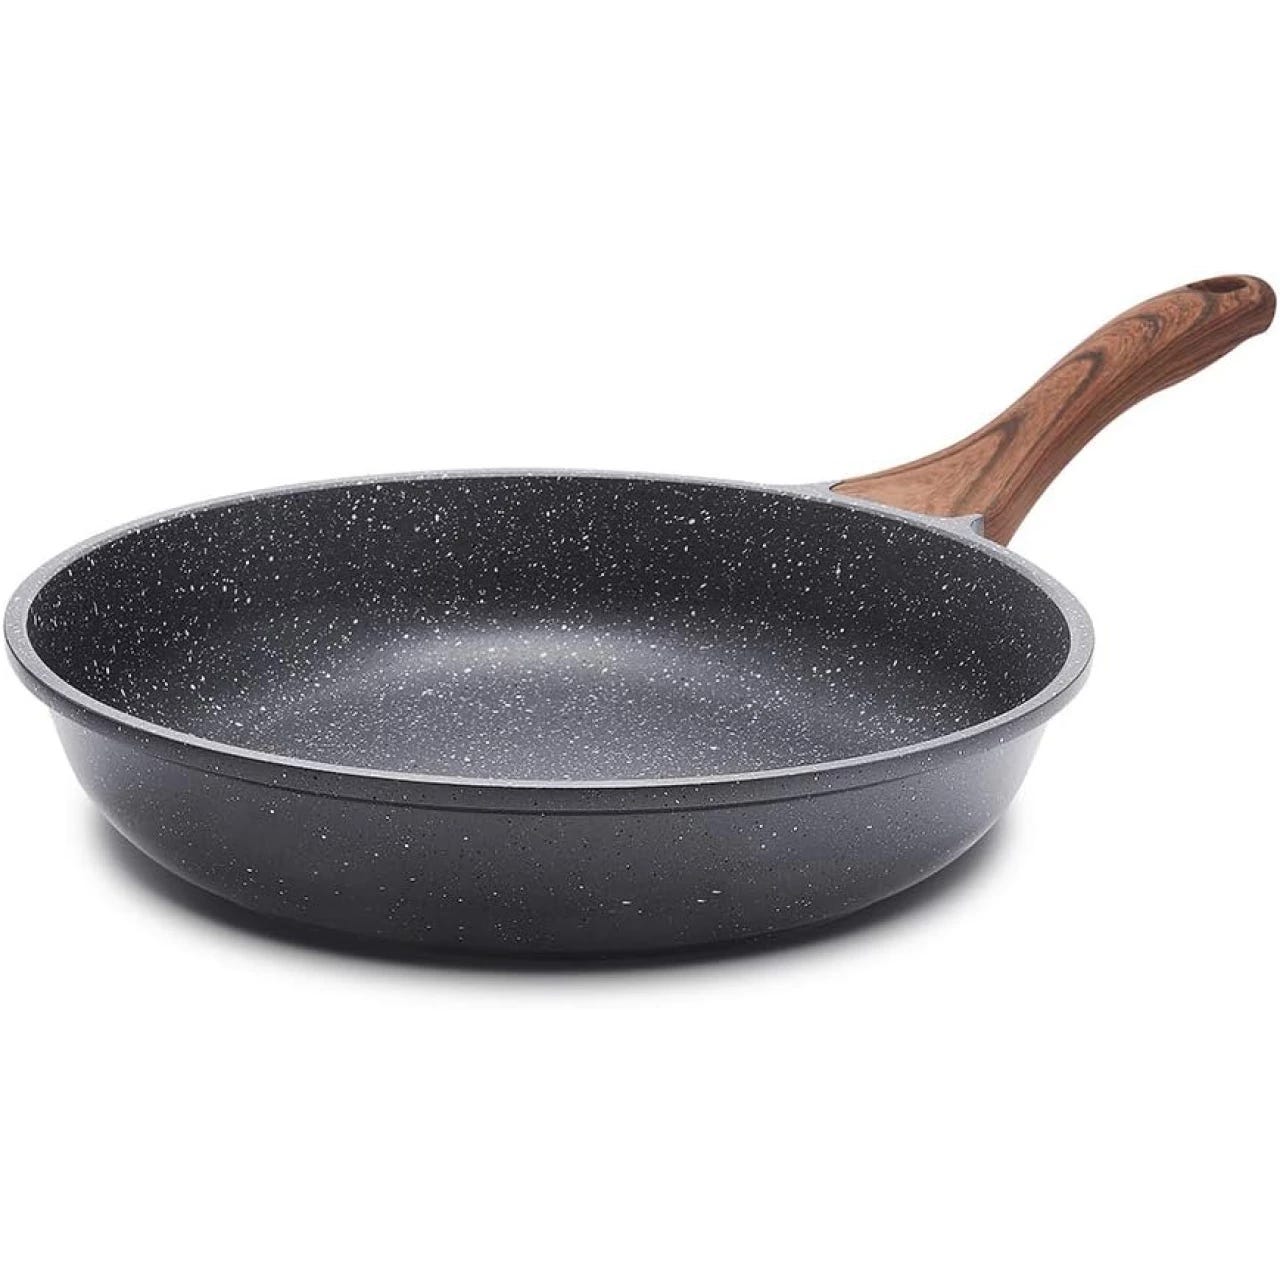 2023 Best Nonstick Frying Pan: Finding the Ideal Skillet